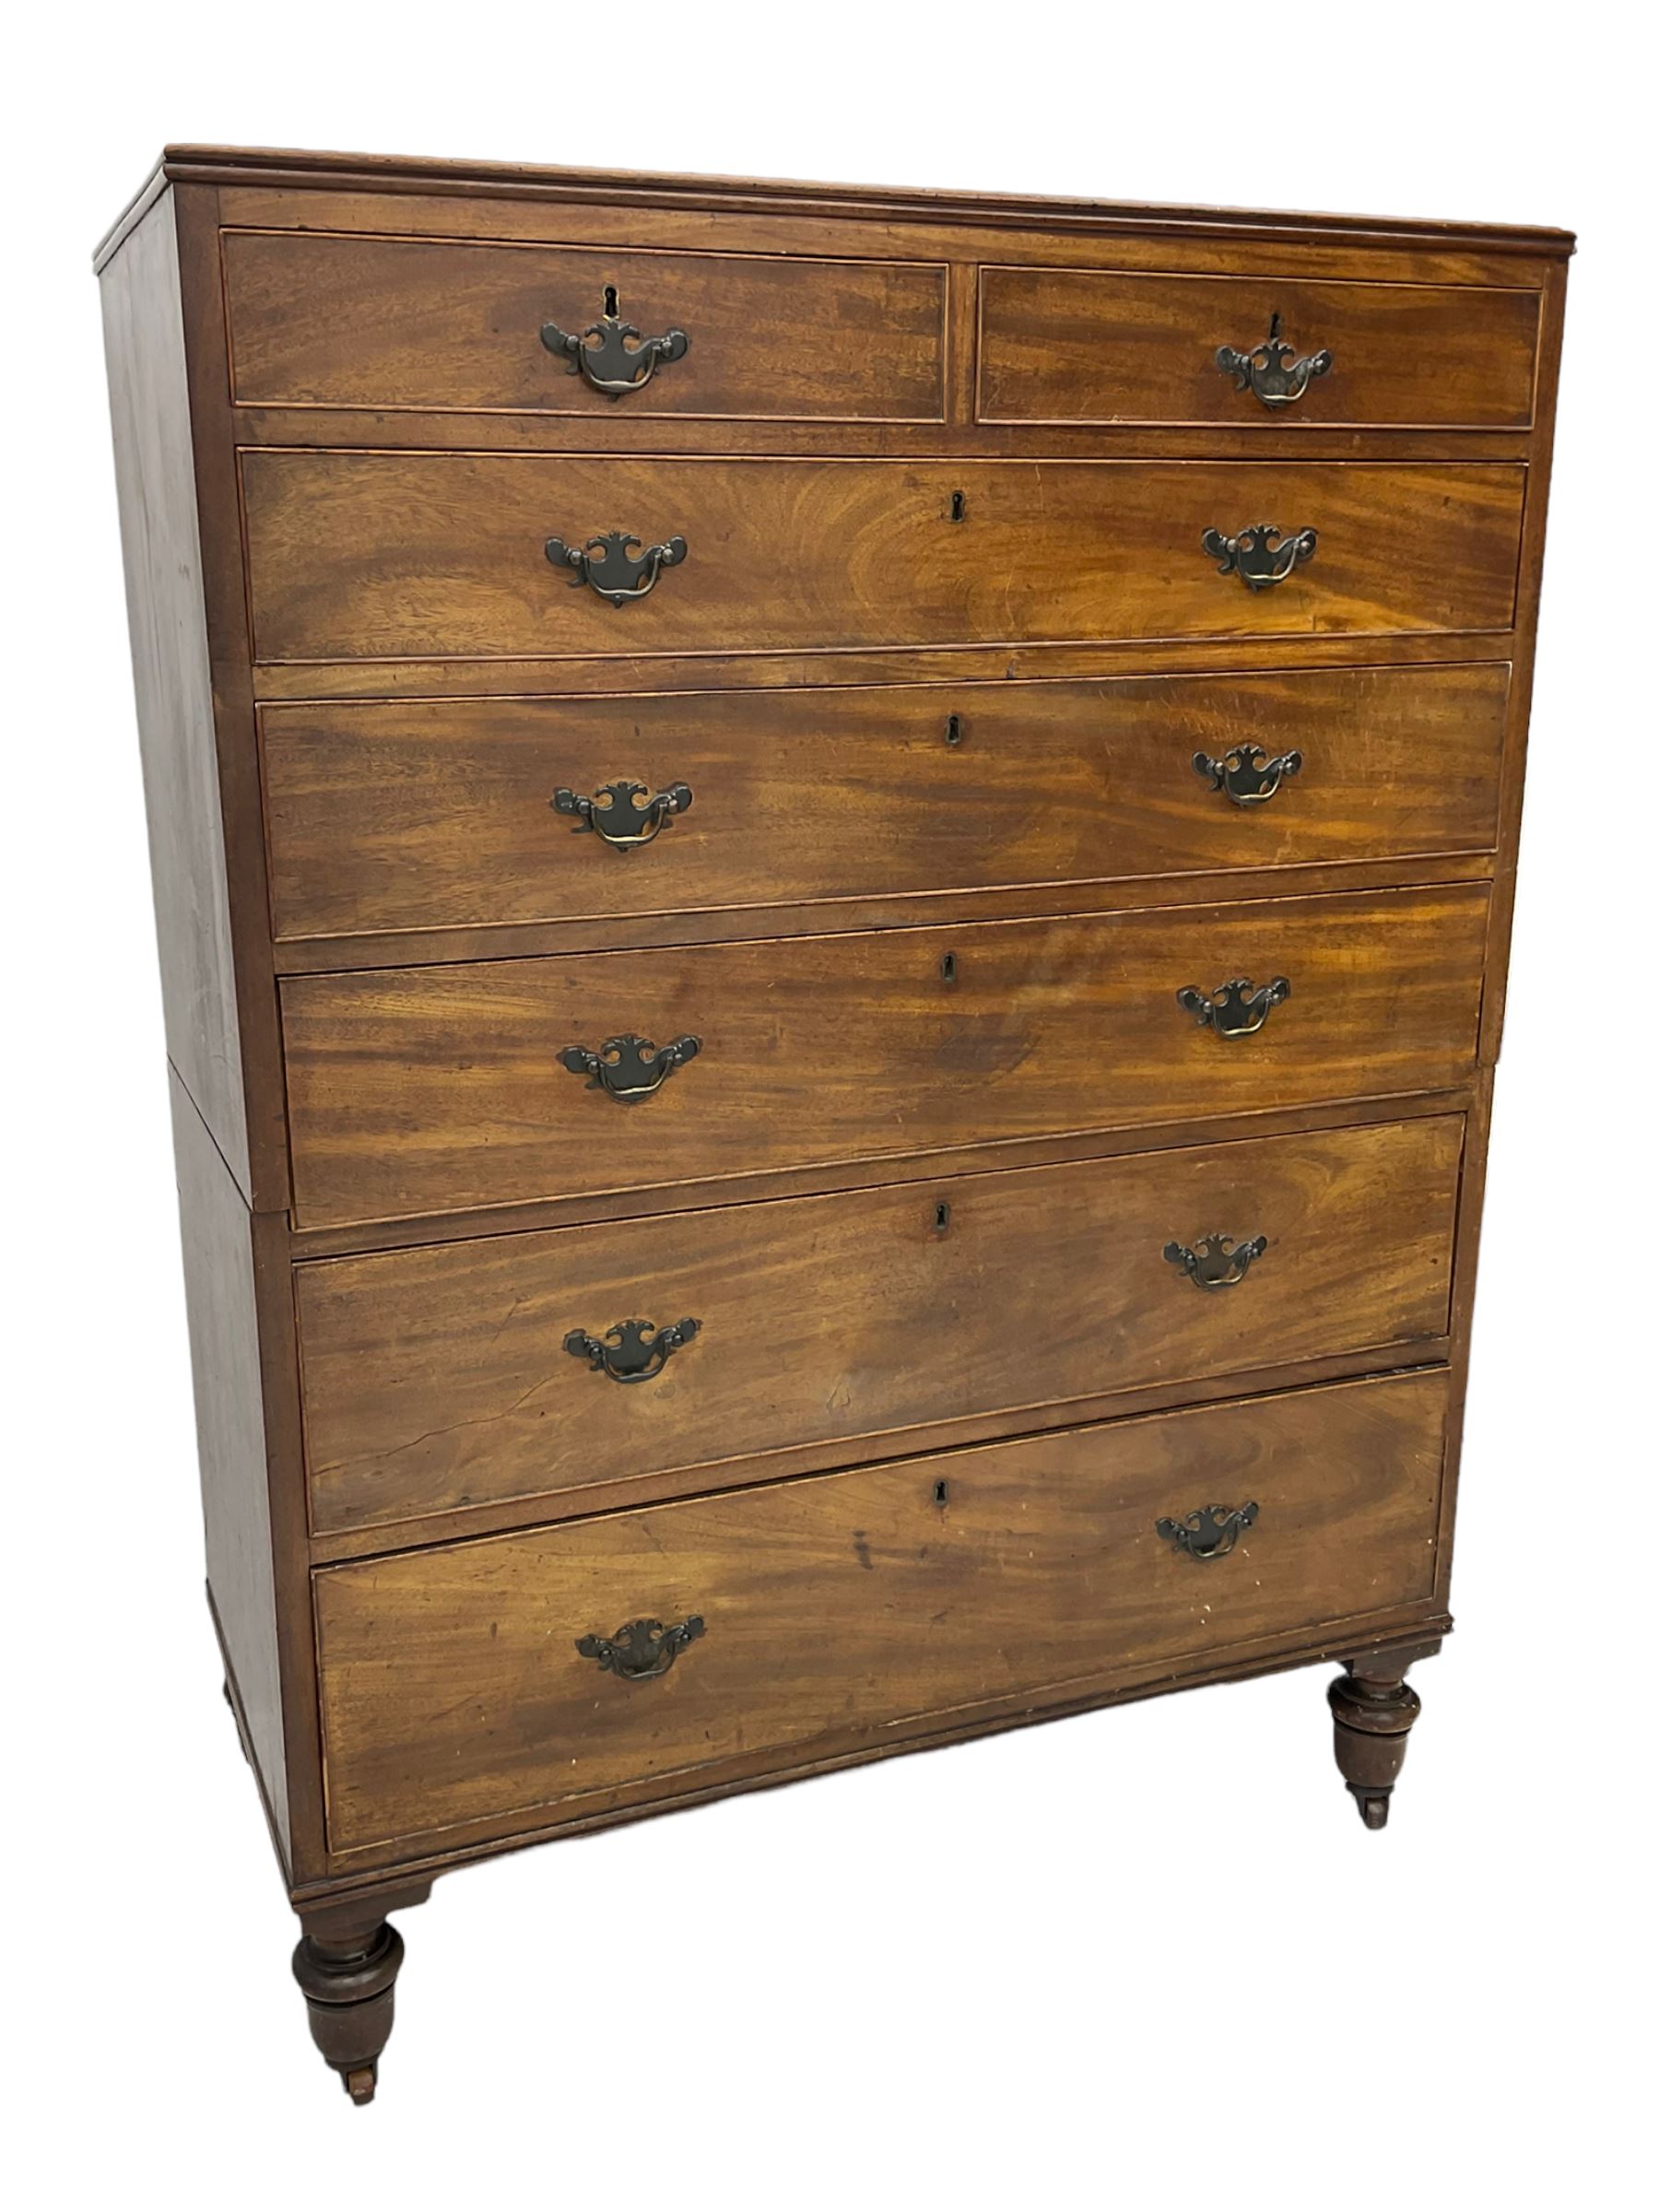 19th century mahogany straight front chest - Image 4 of 8